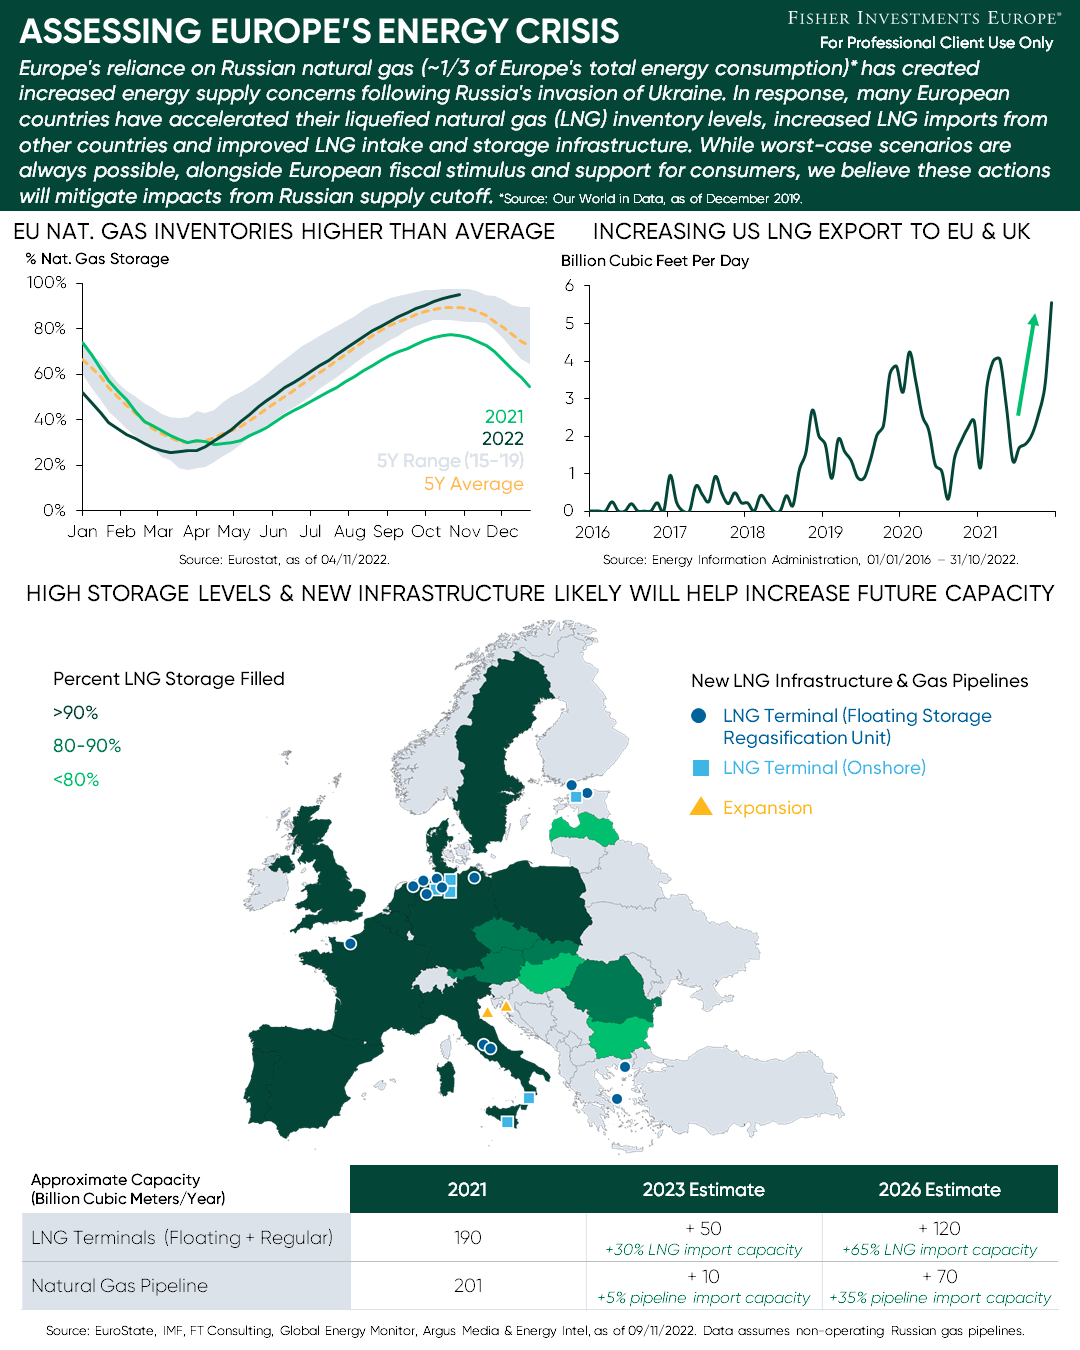 Assessing Europe’s Energy Crisis Infographic